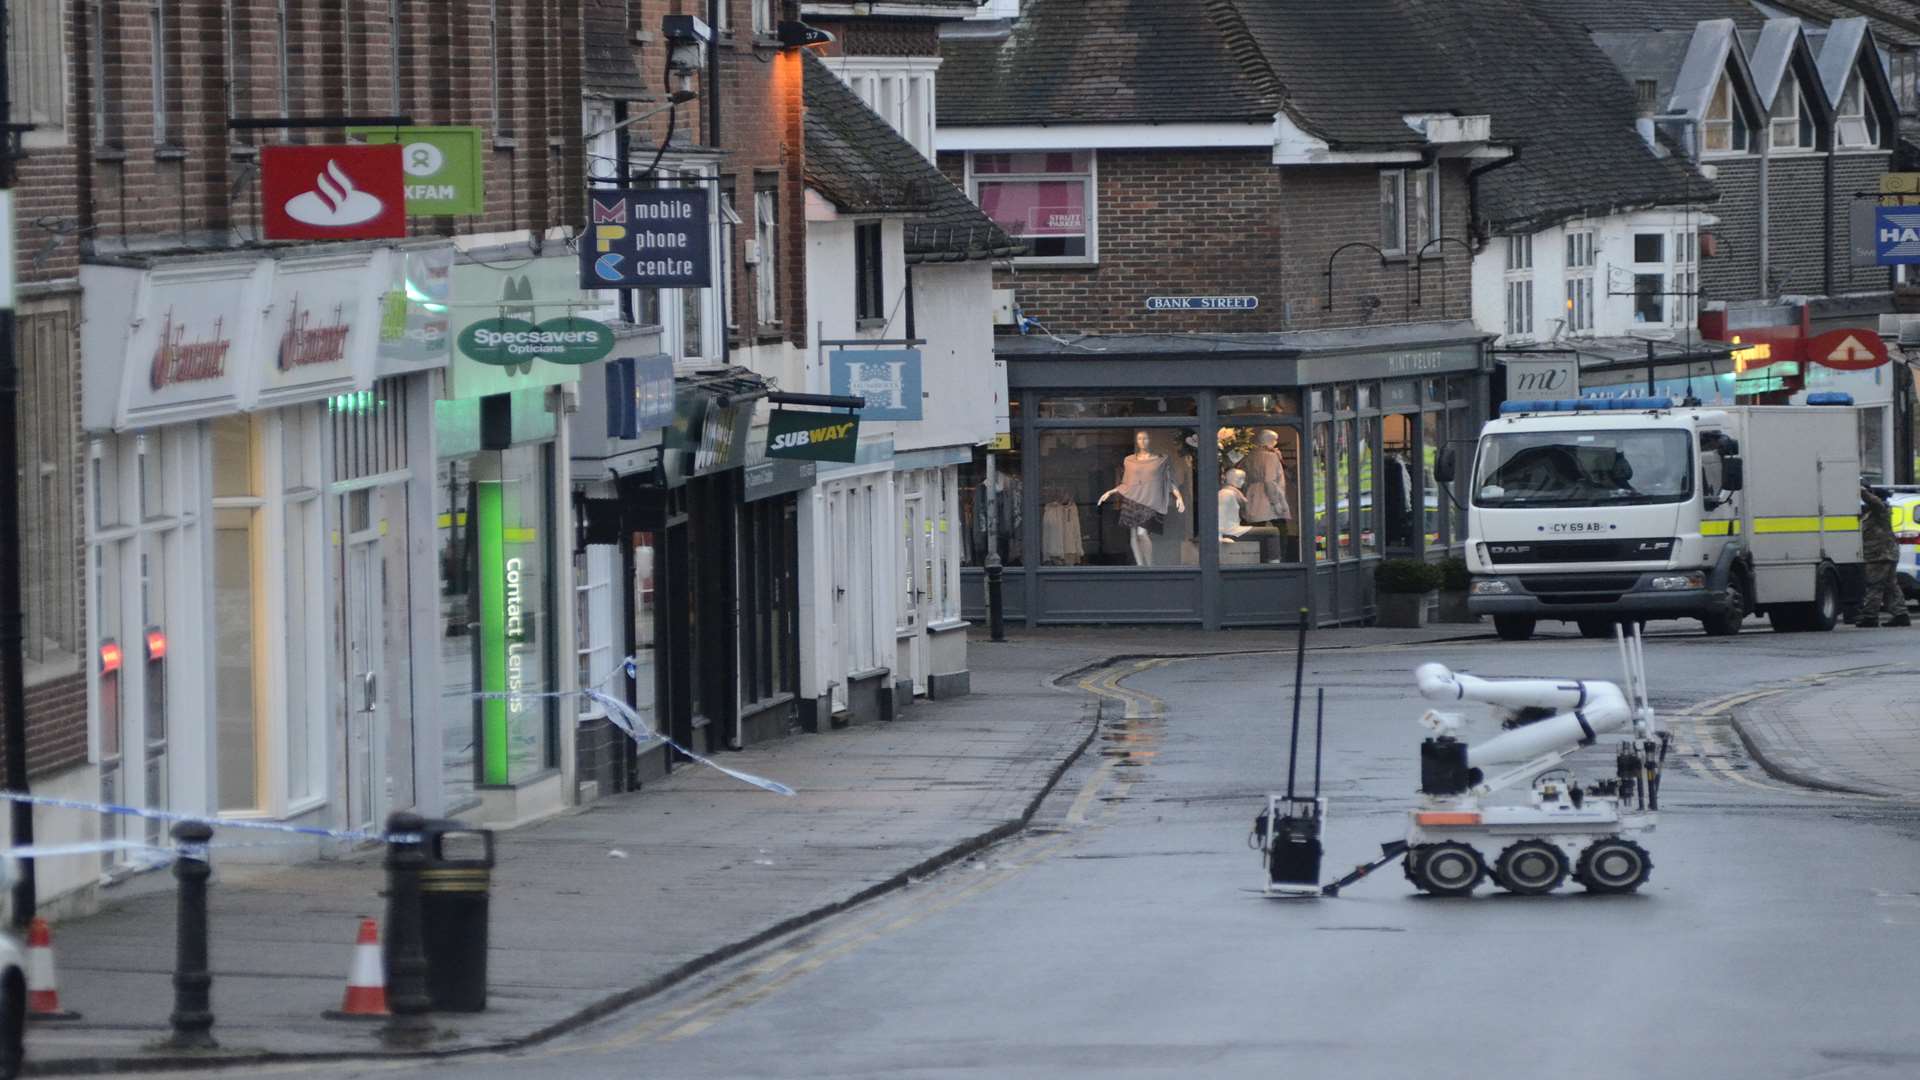 The bomb squad's robot heads to Santander